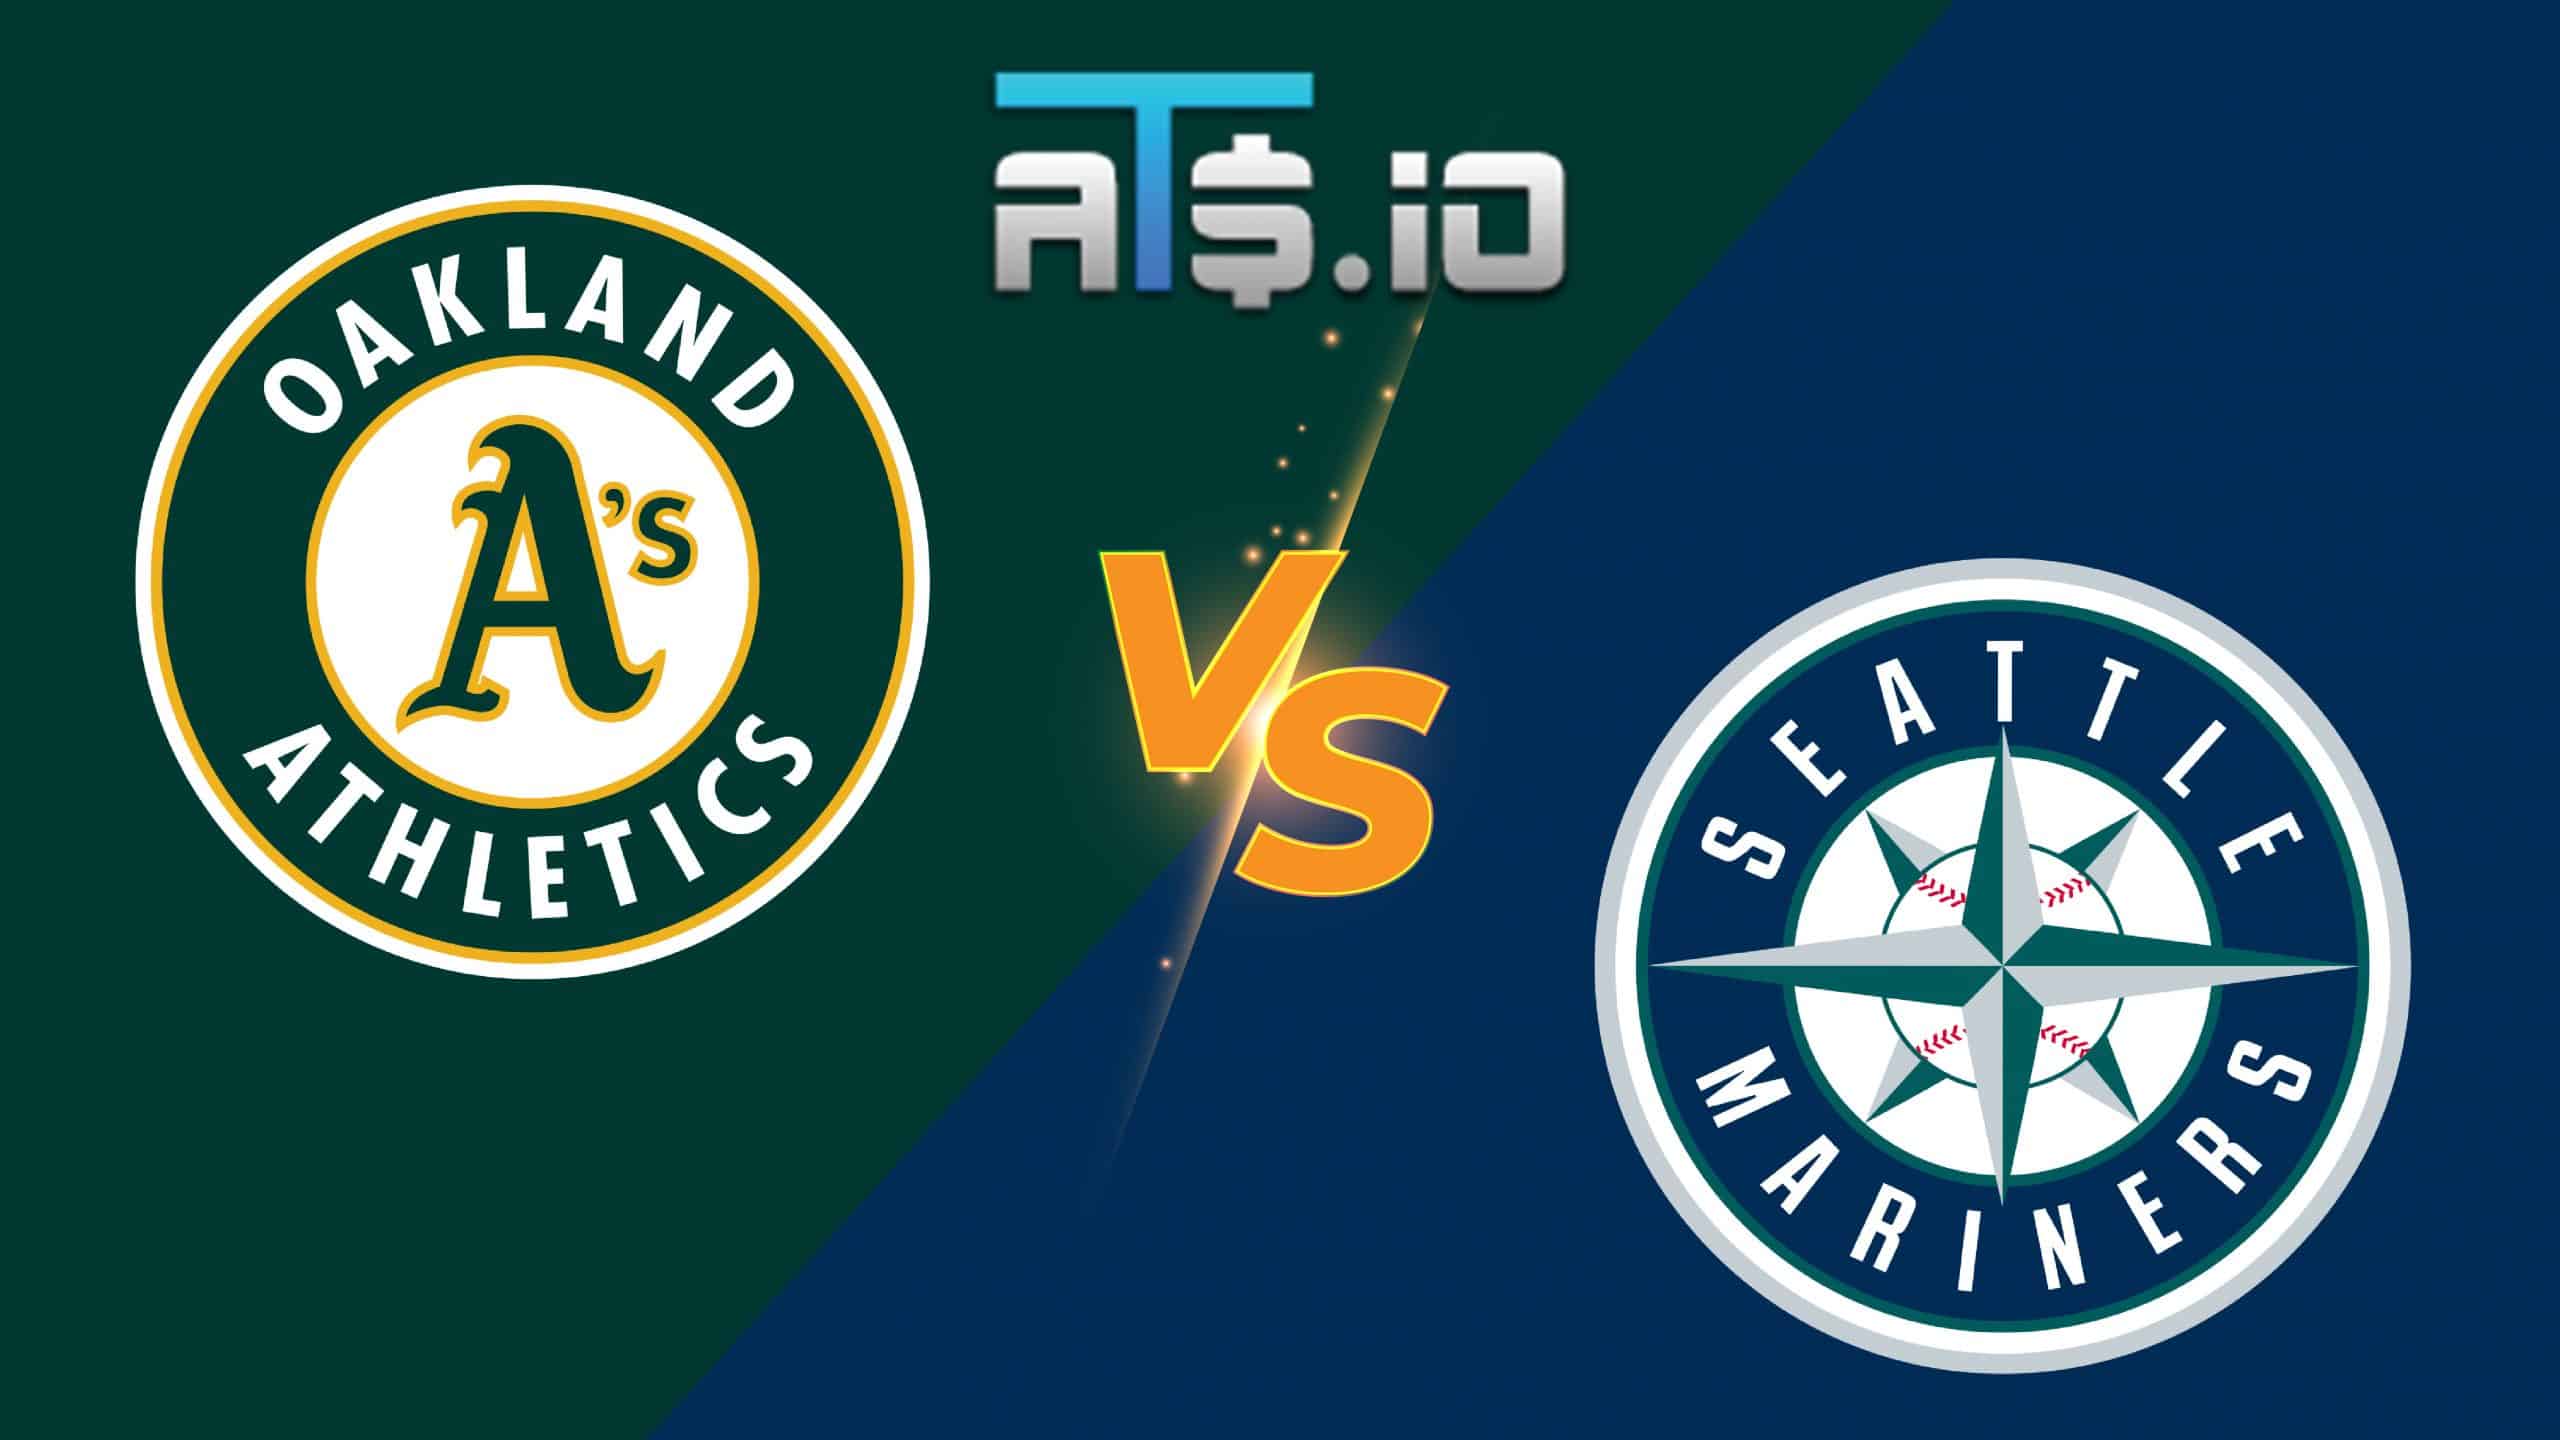 A's vs Mariners